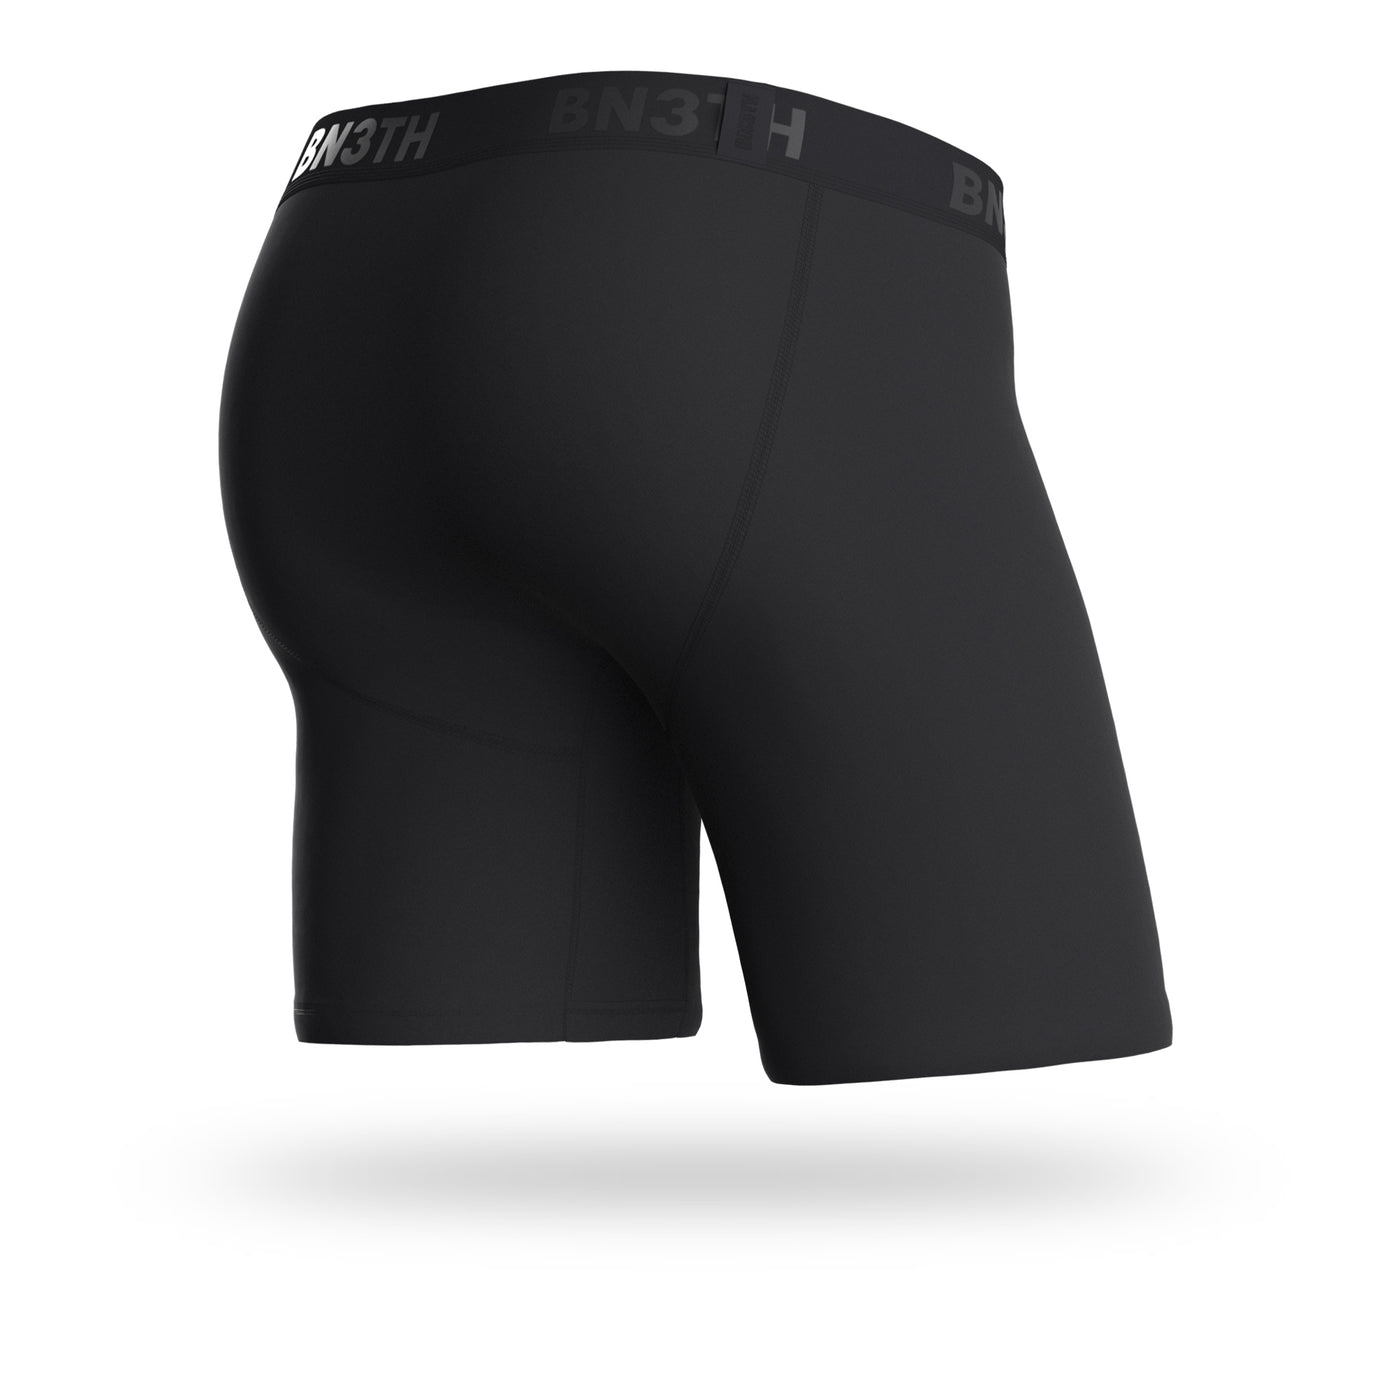 BN3TH Classic Boxer Brief with Fly - Black // M111021-028